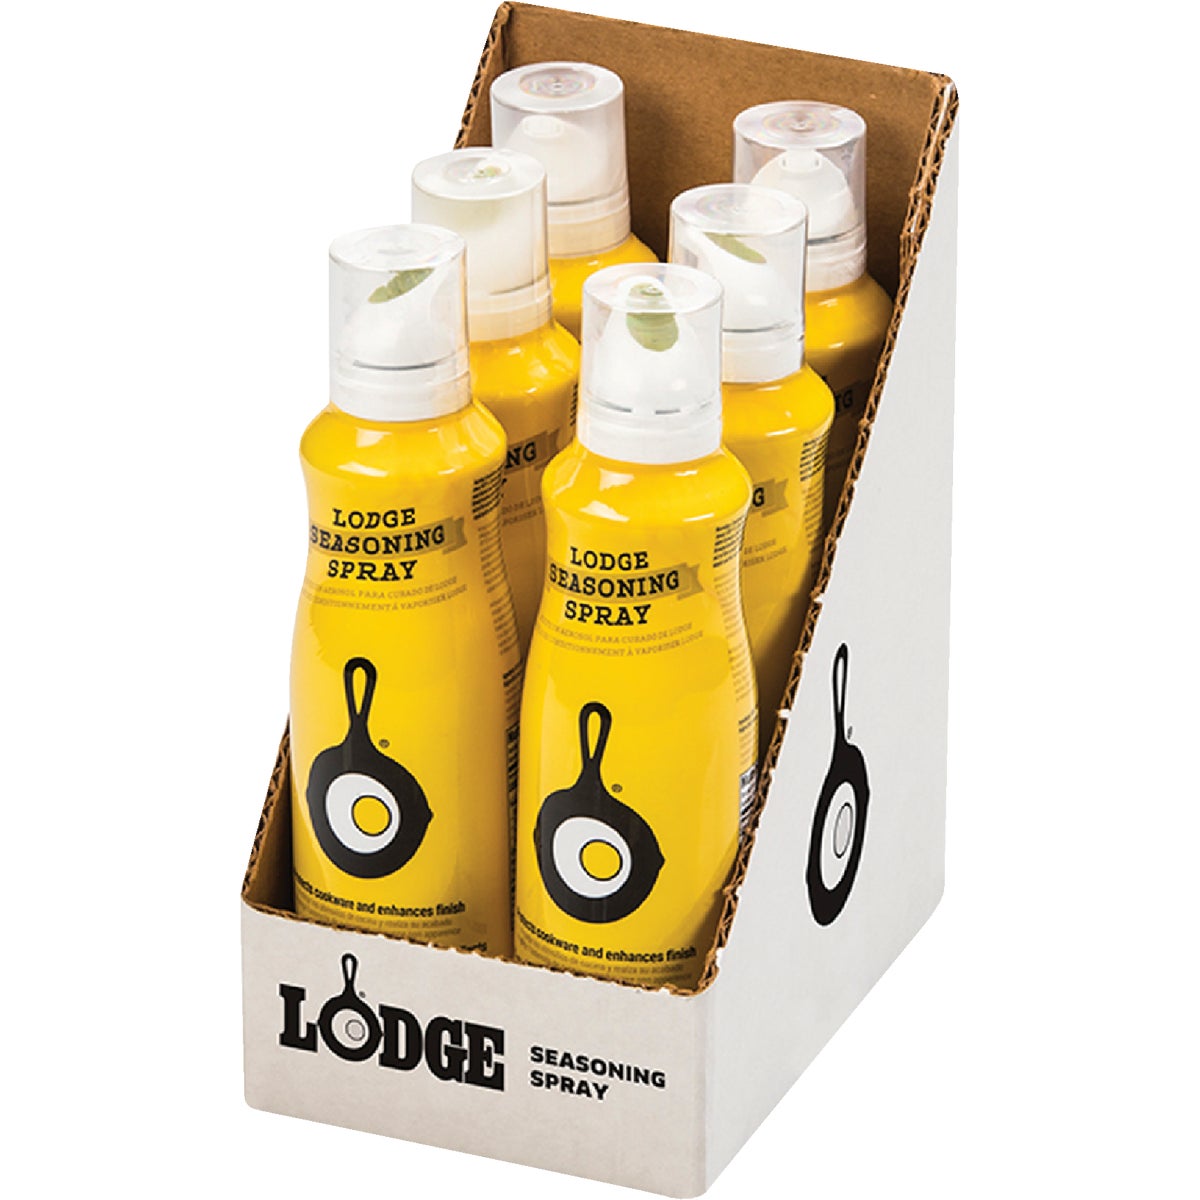 Item 601800, Lodge Seasoning Spray protects cookware, enhances the finish, and improves 